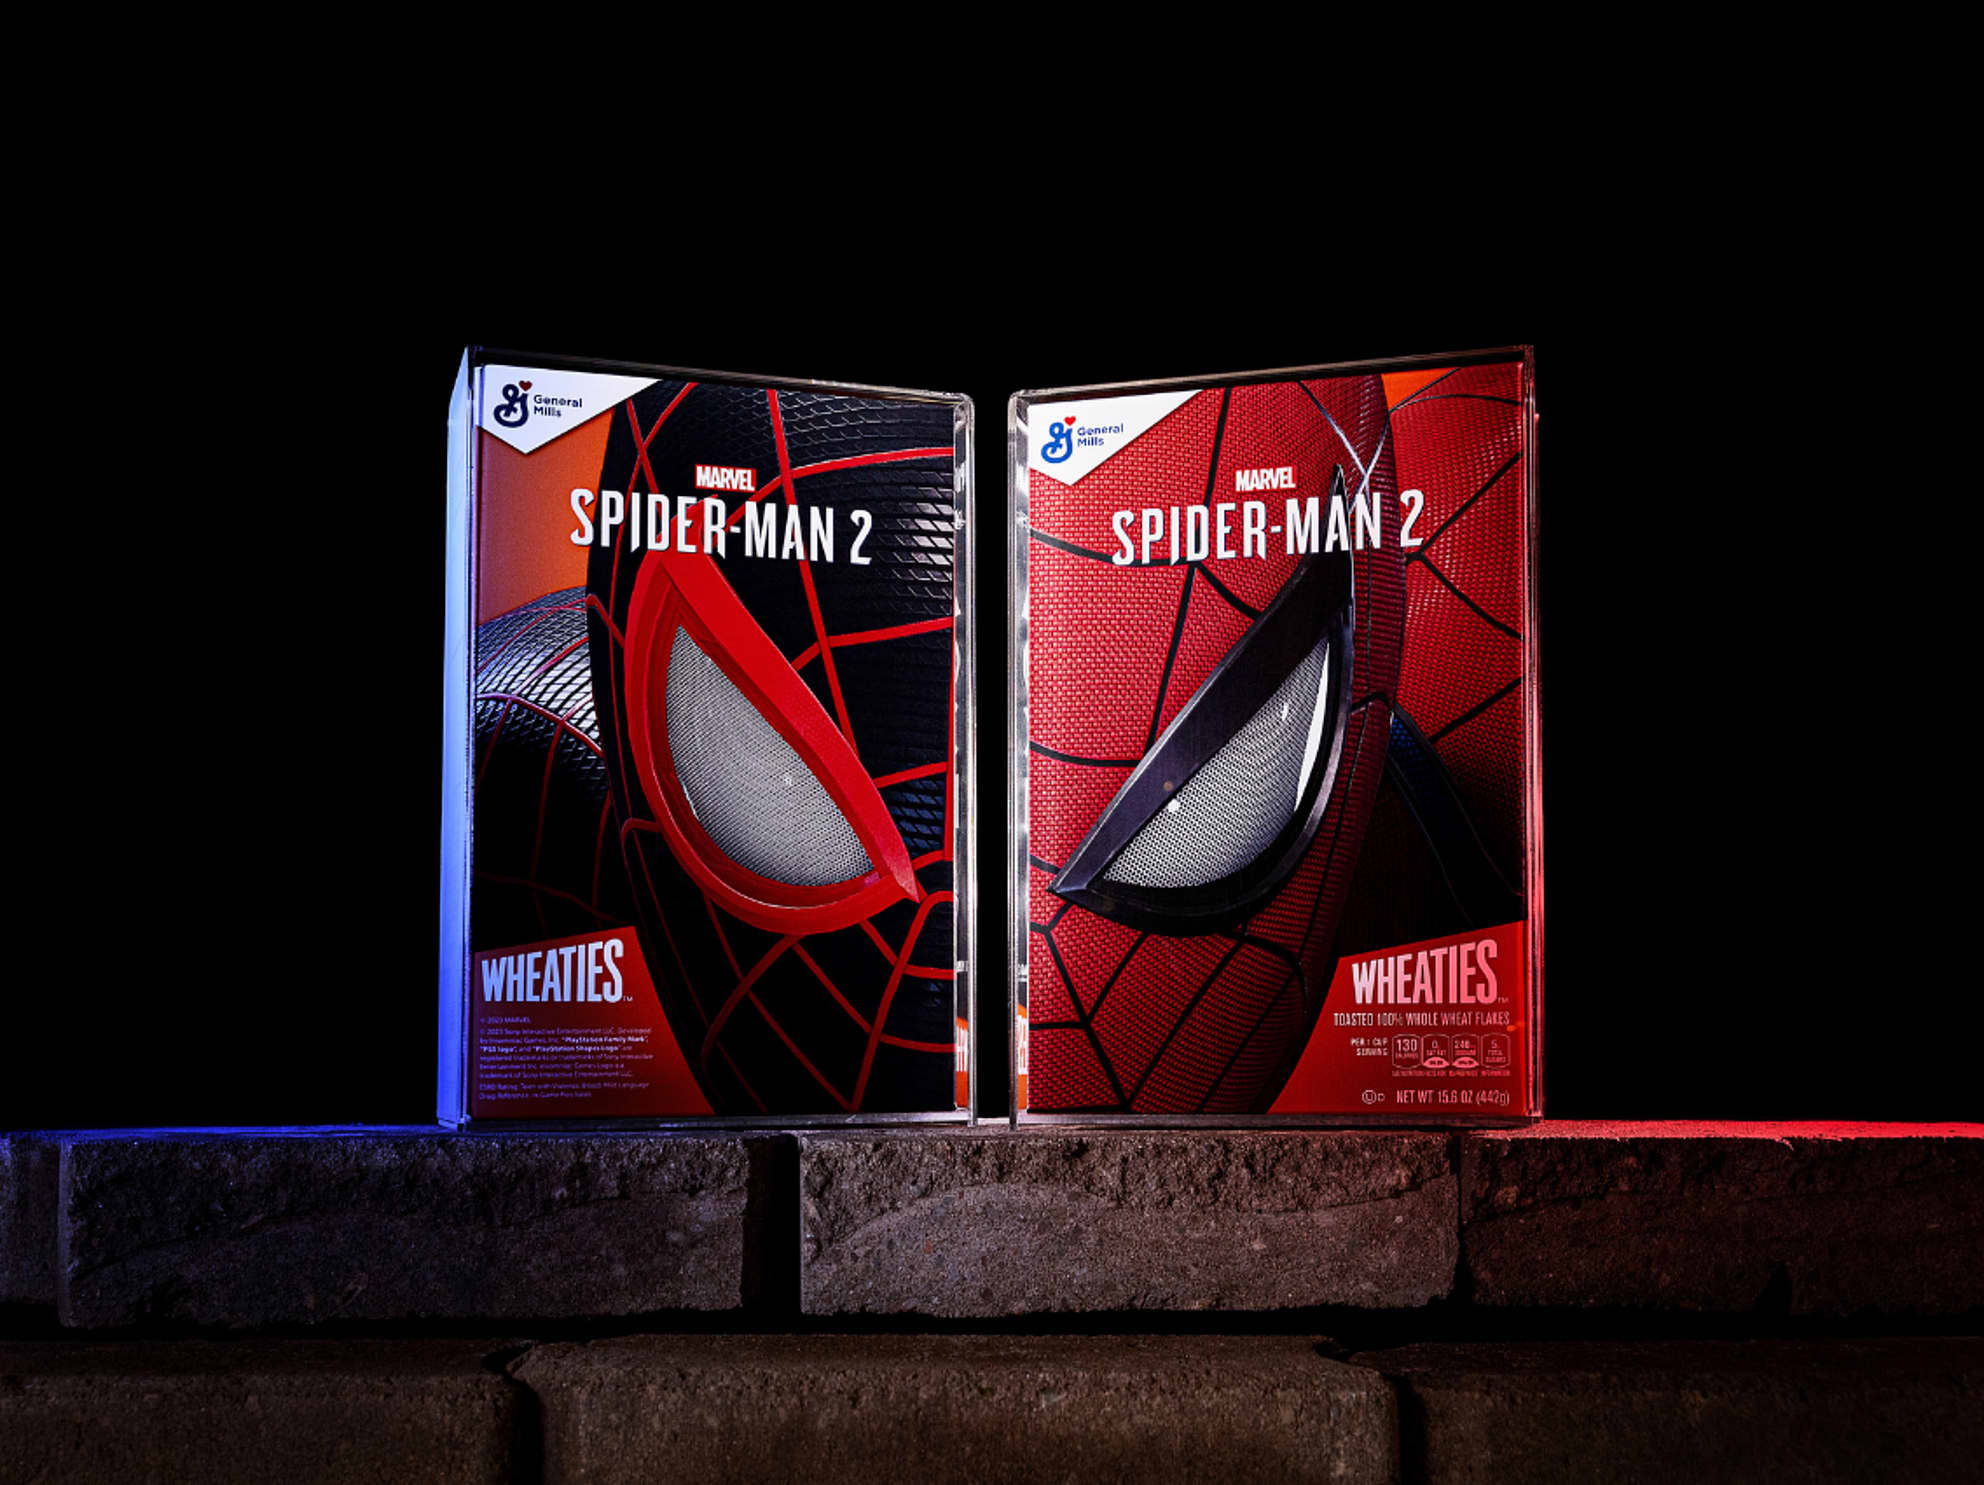 Wheaties x Spiderman cereal boxes